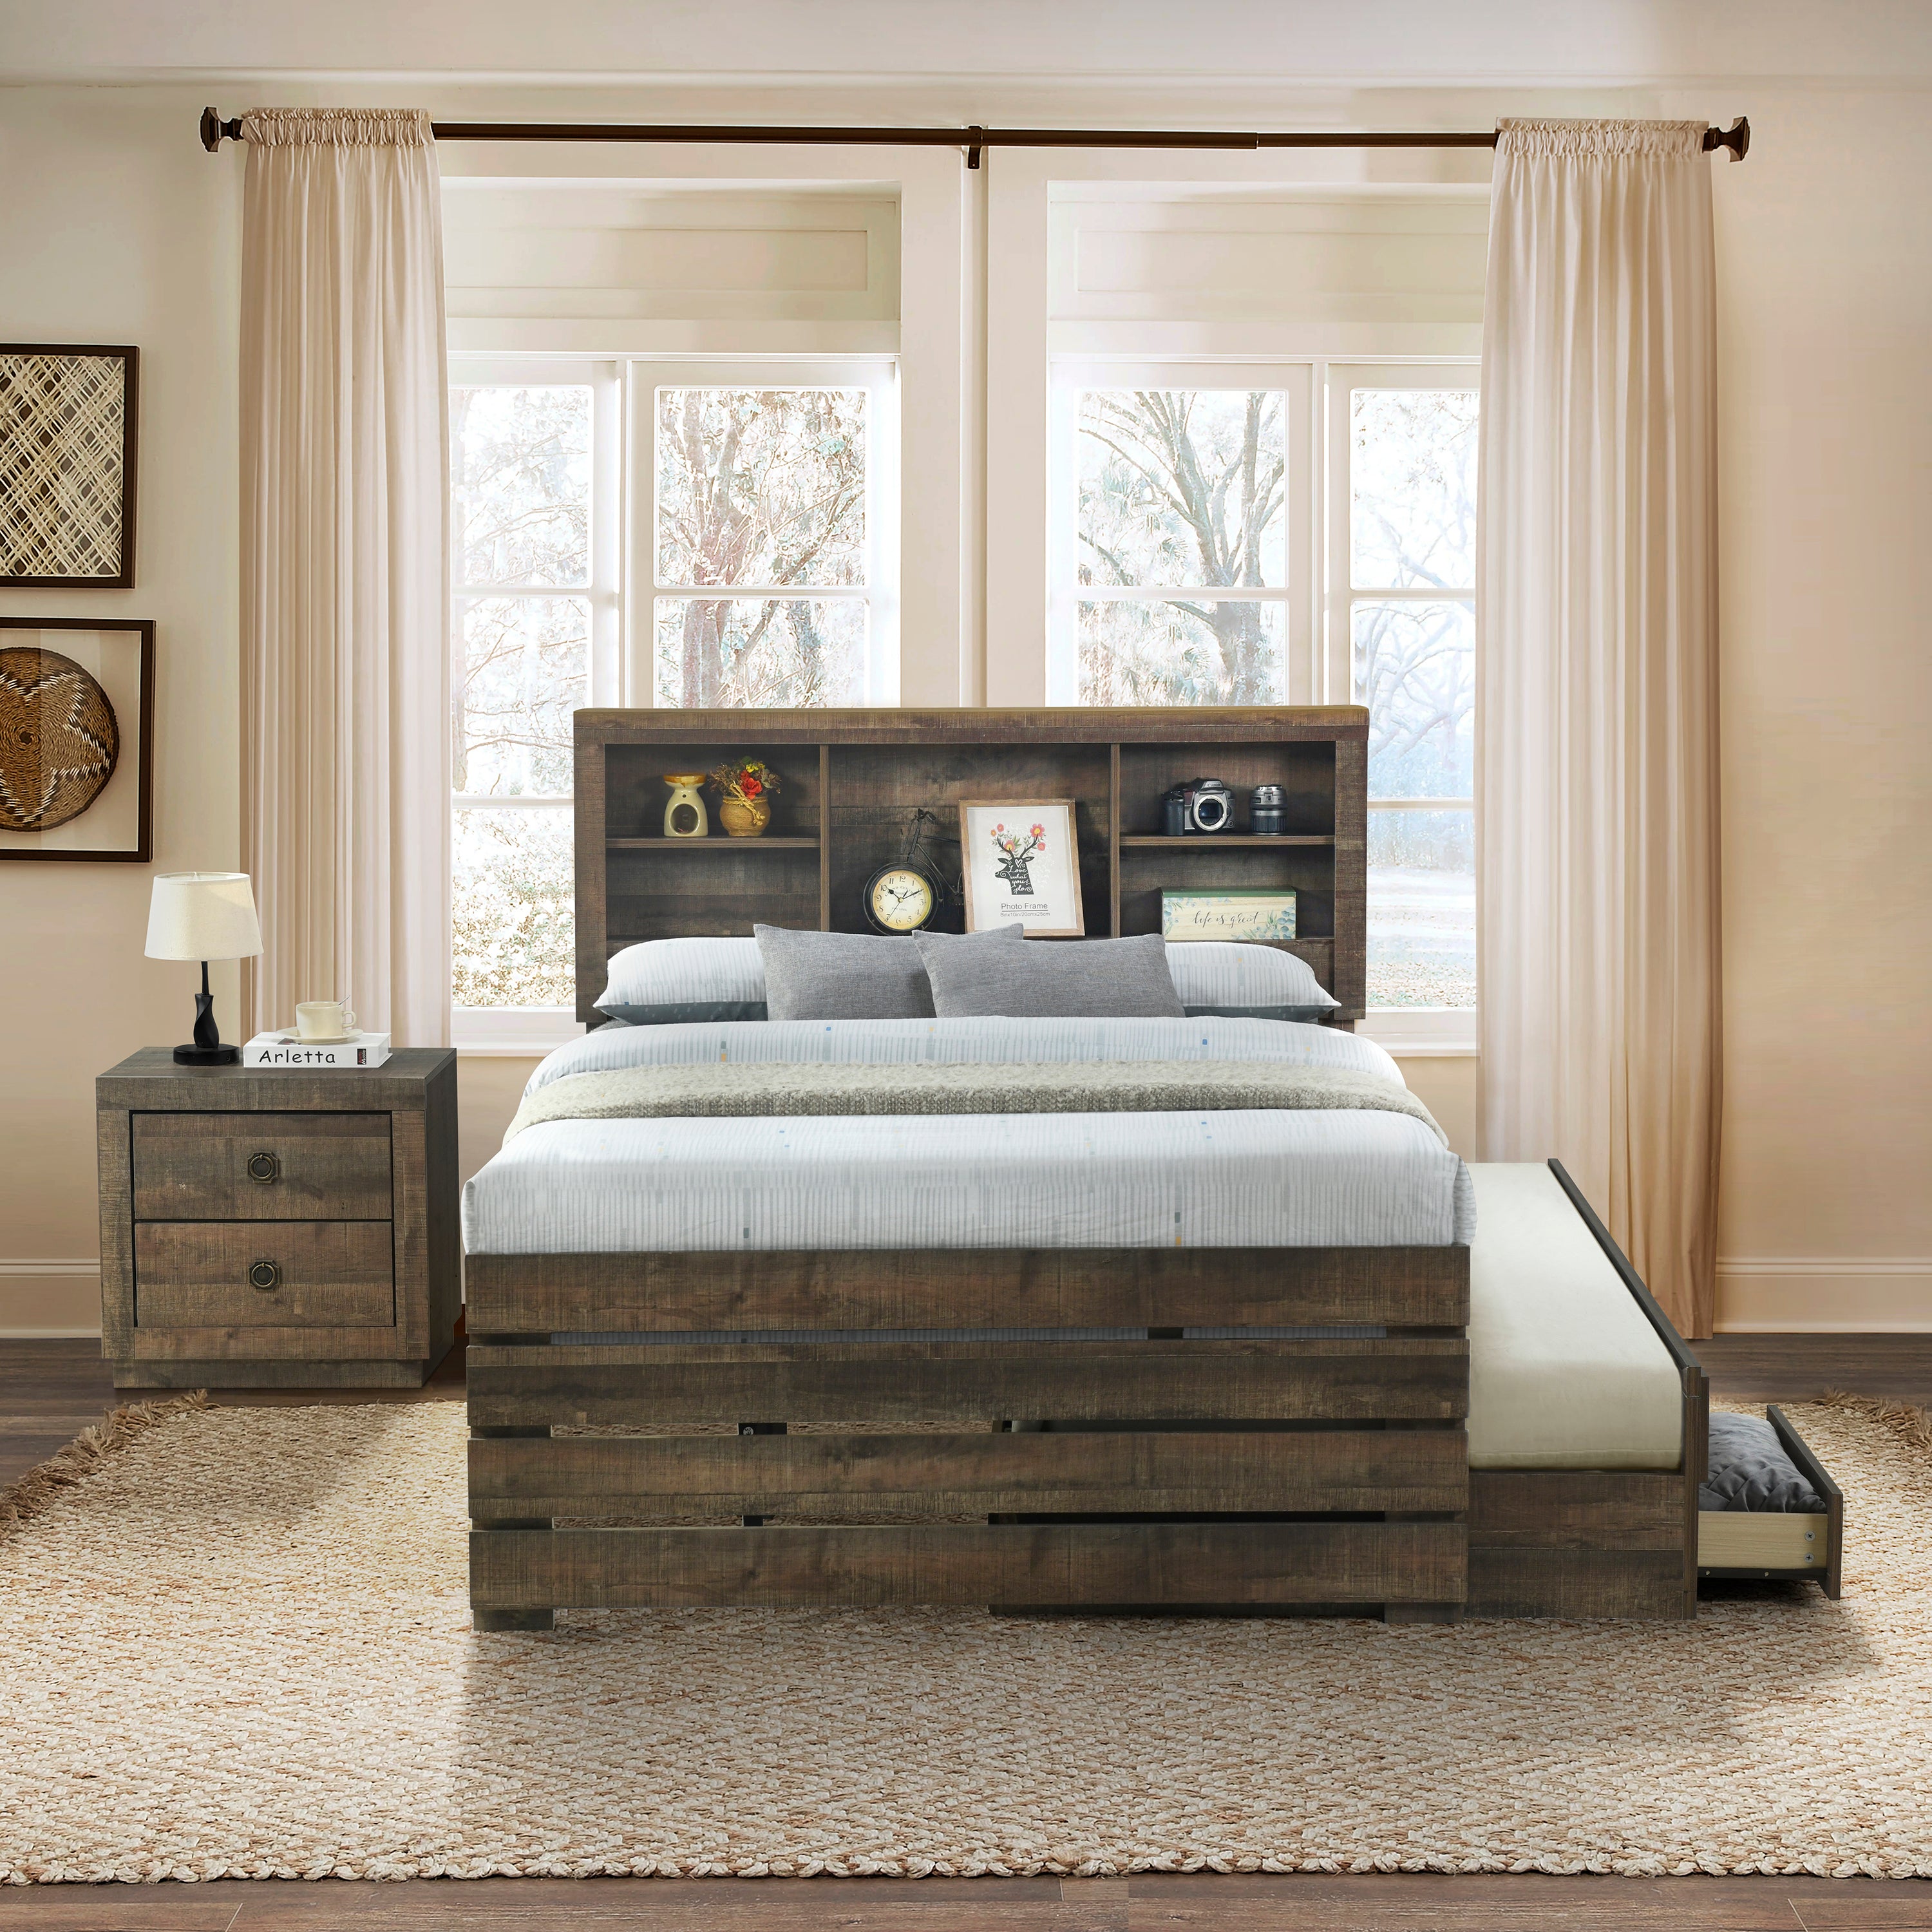 🆓🚛 2 Pieces Bedroom Sets Farmhouse Style Full Size Bookcase Captain Bed and Nightstand, Rustic Brown